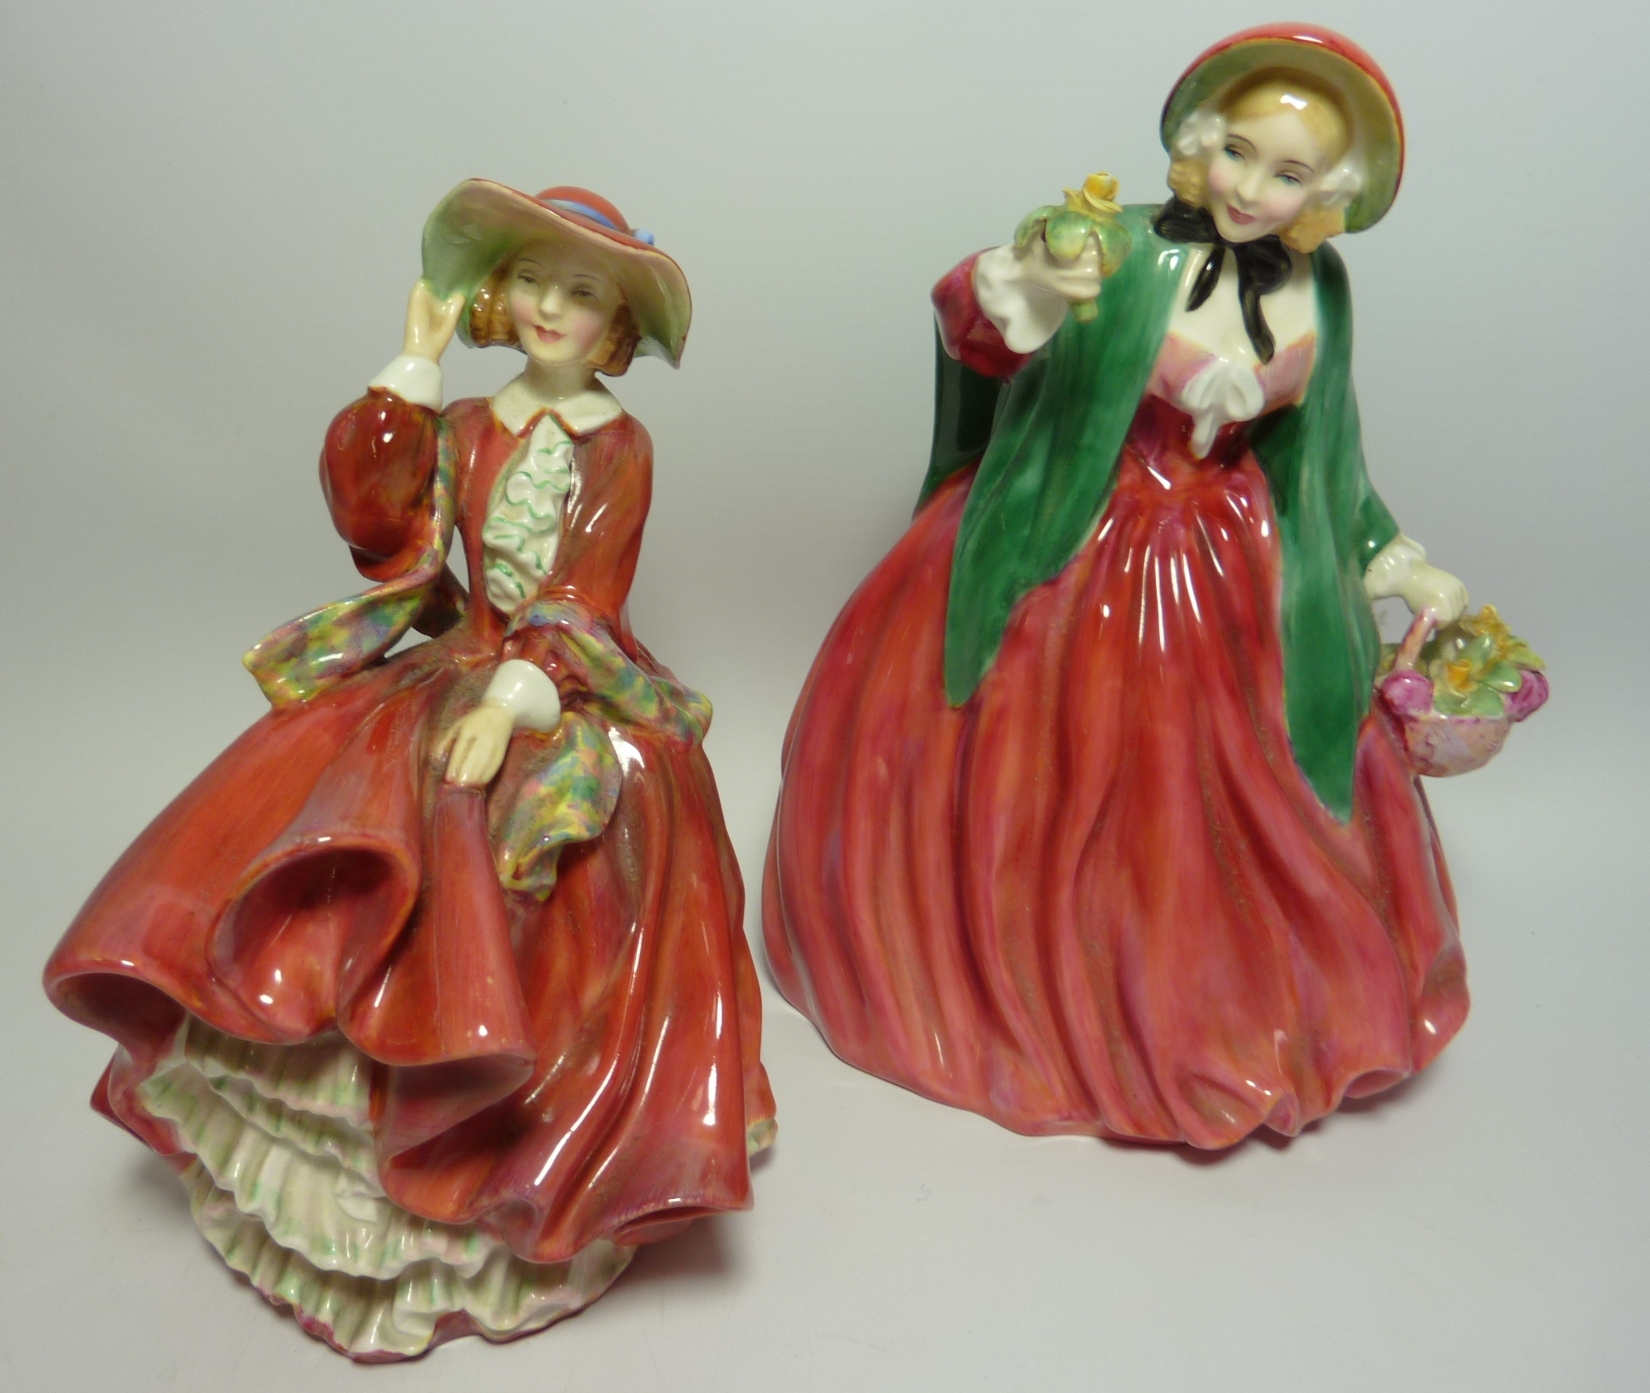 Two Royal Doulton figures - 'Lady Charmian' HN1949 and 'Top o' the Hill' HN1834 (both having